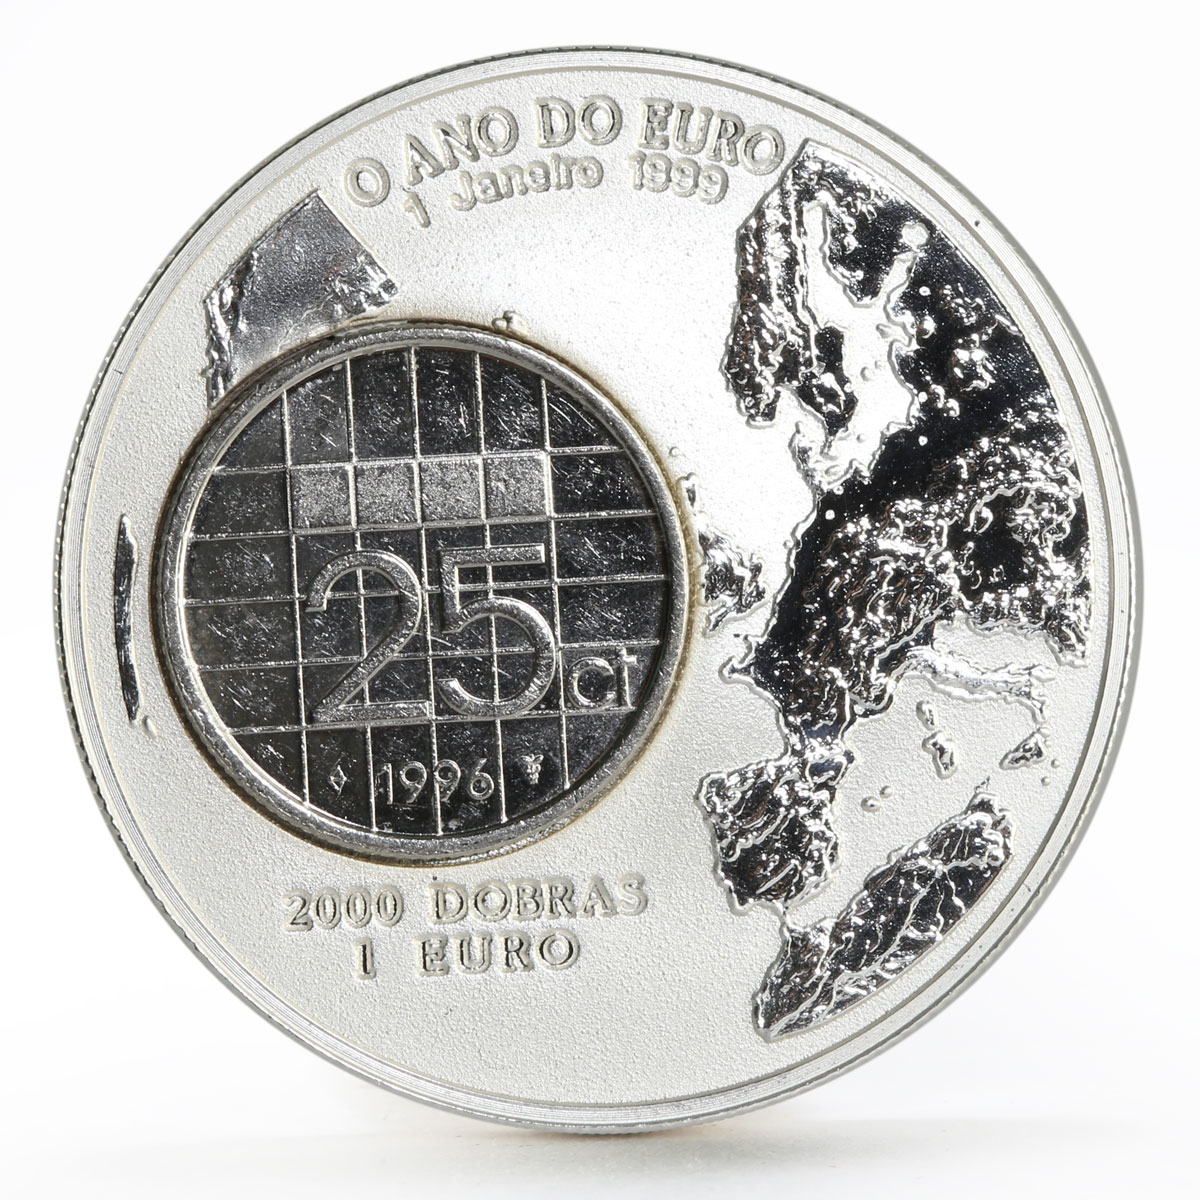 Sao Tome and Principe 2000 dobras Year of the Euro 25 Cents bimetal coin 1999